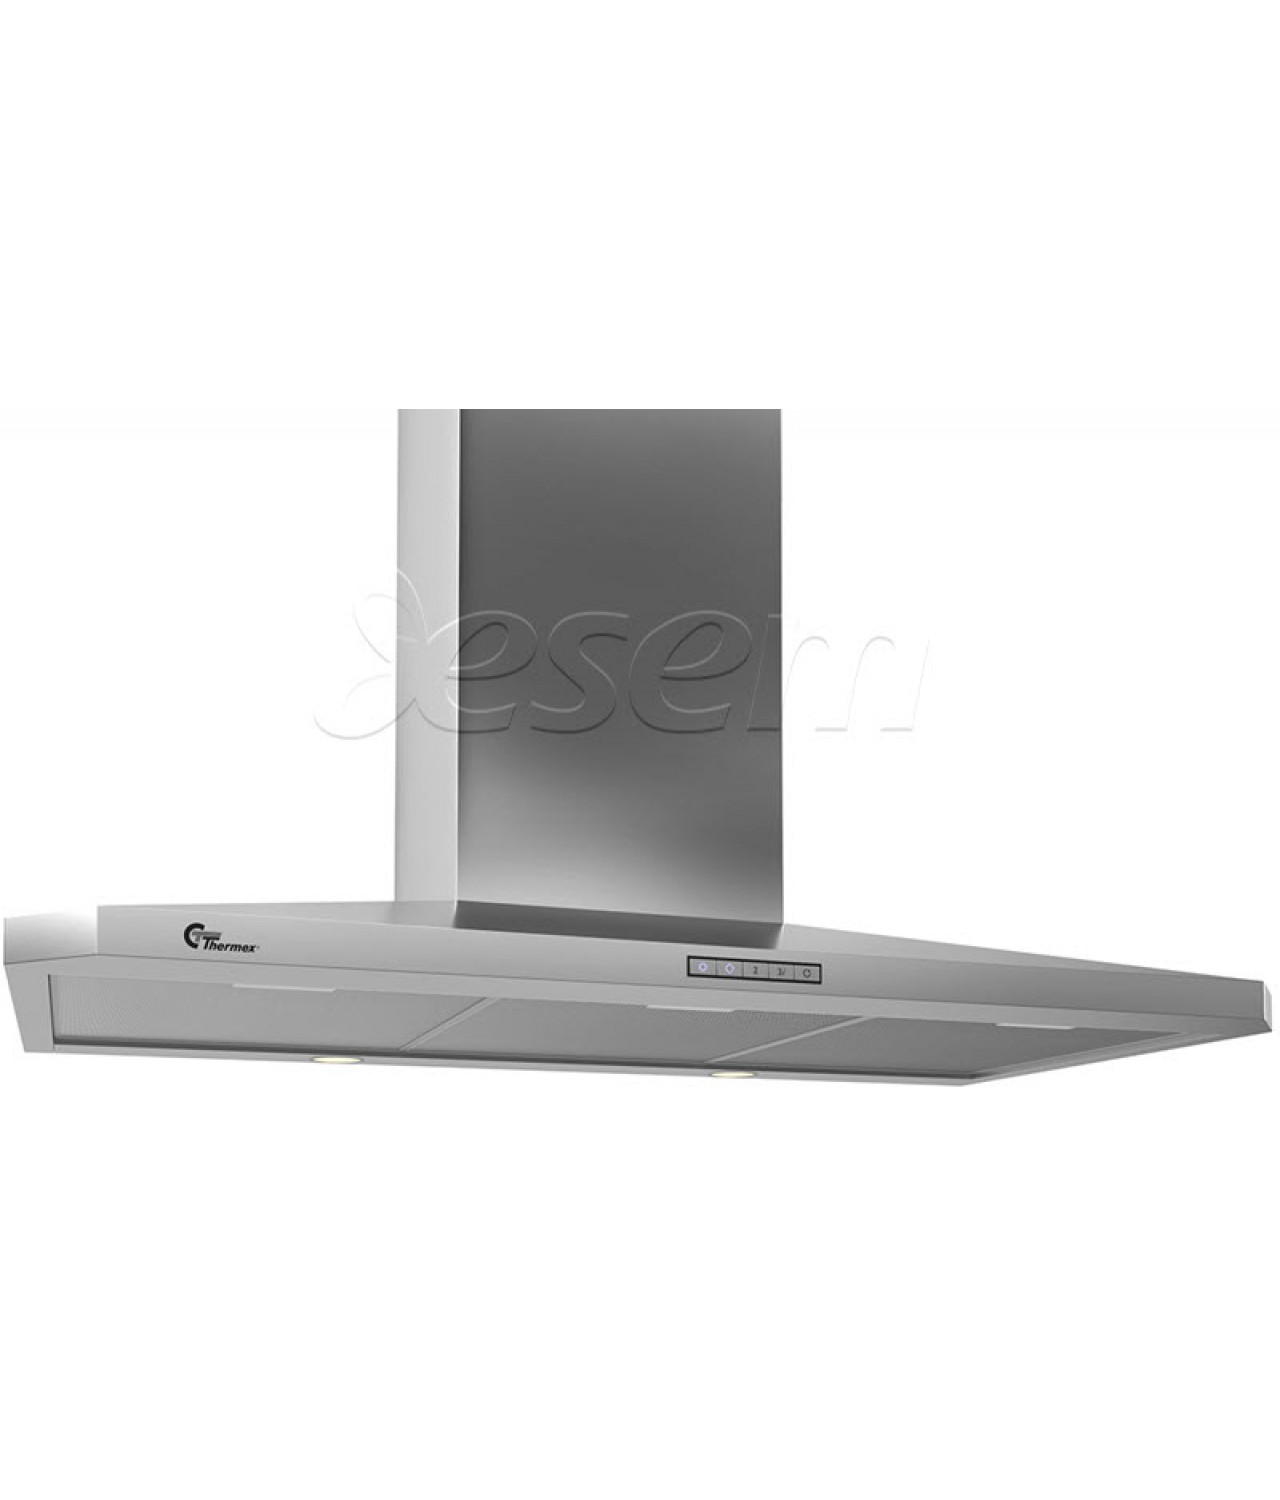 Wall mounted cooker hoods Decor 787 stainless steel 900 mm